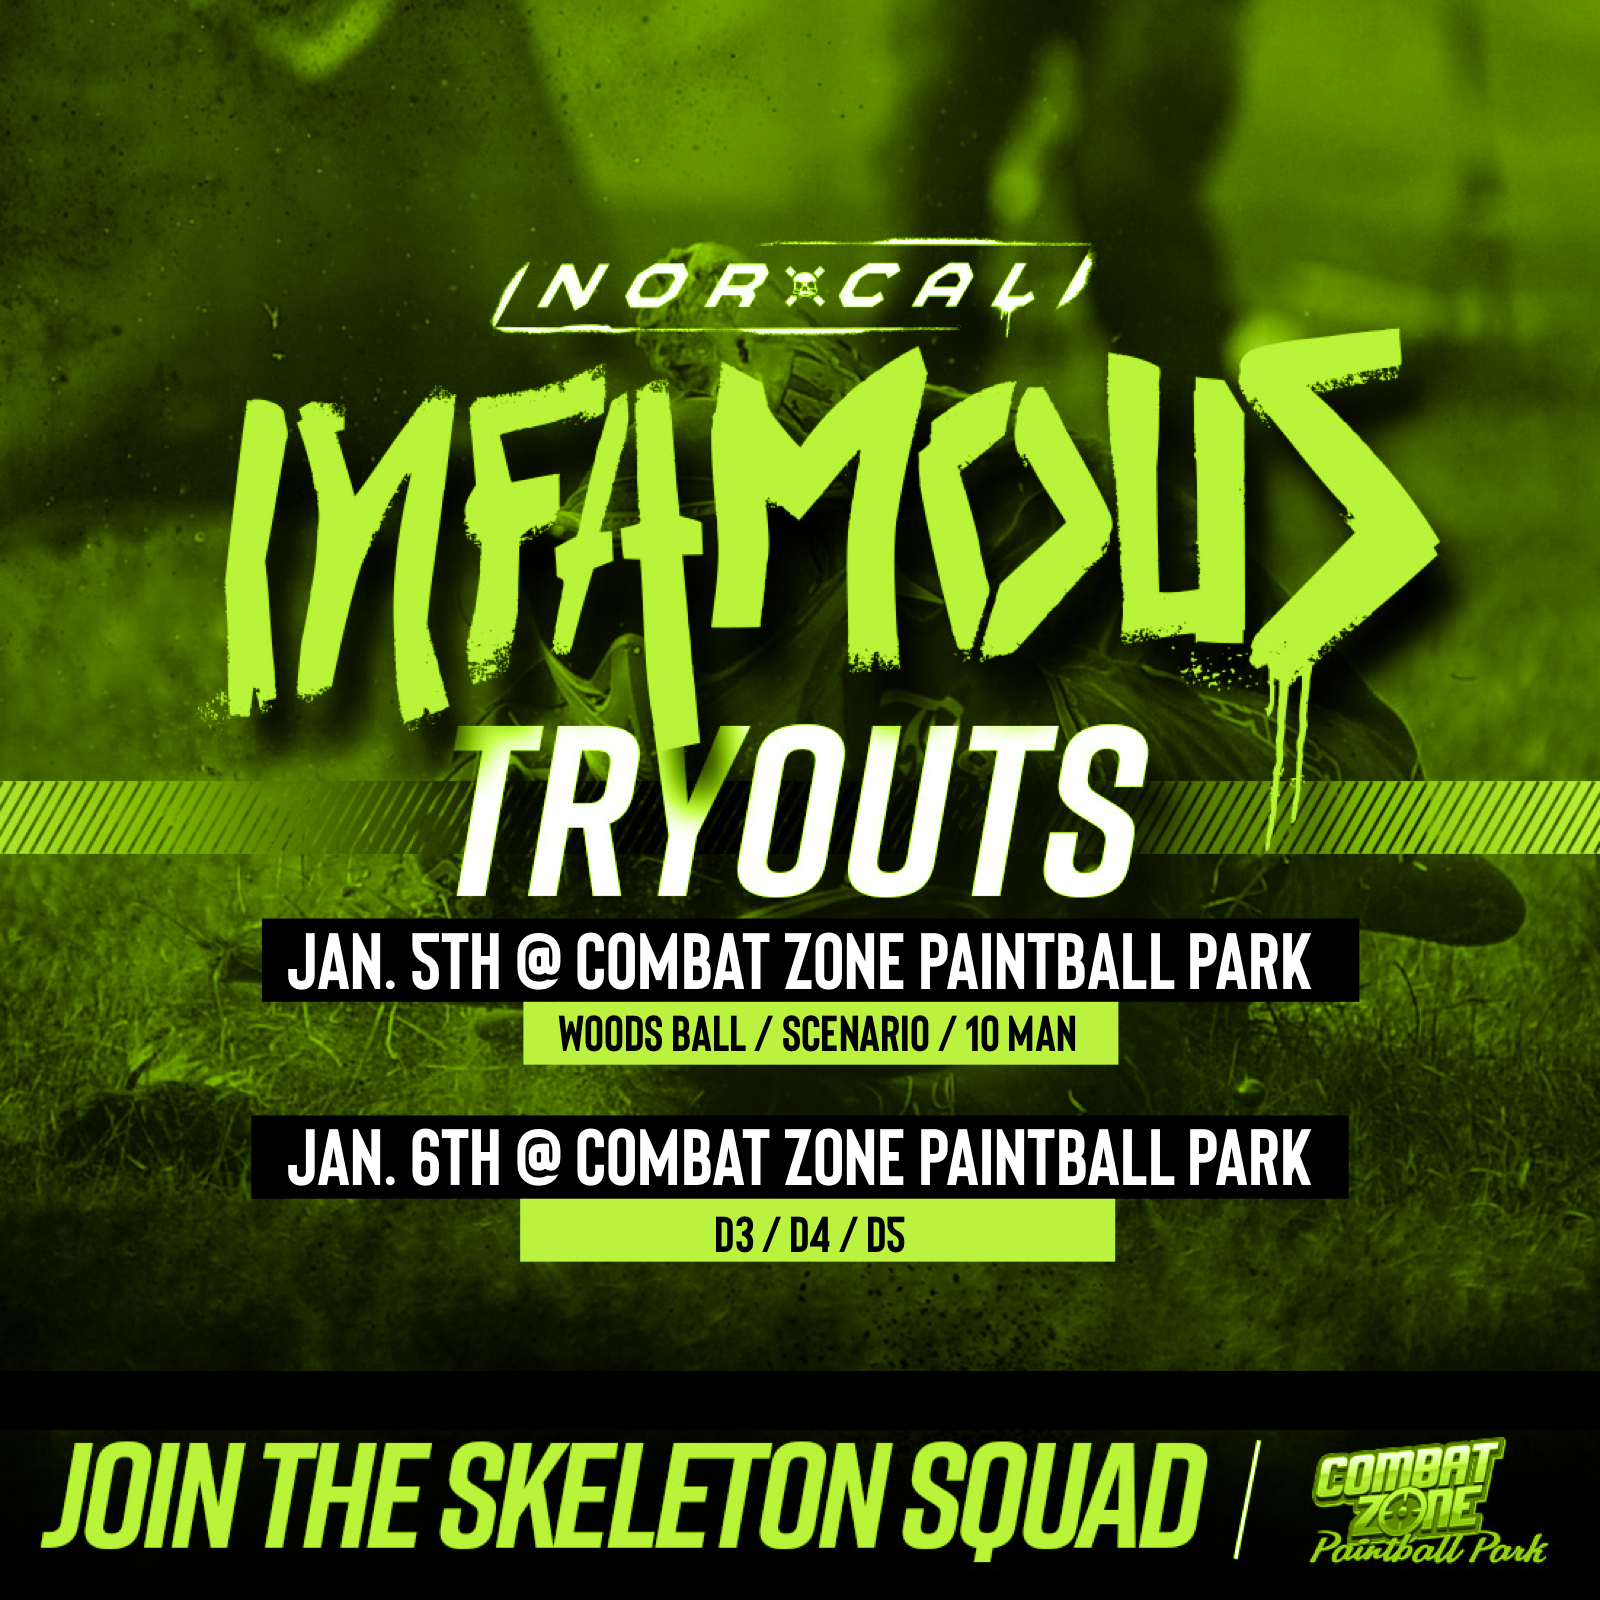 NOR-CAL Infamous Tryouts